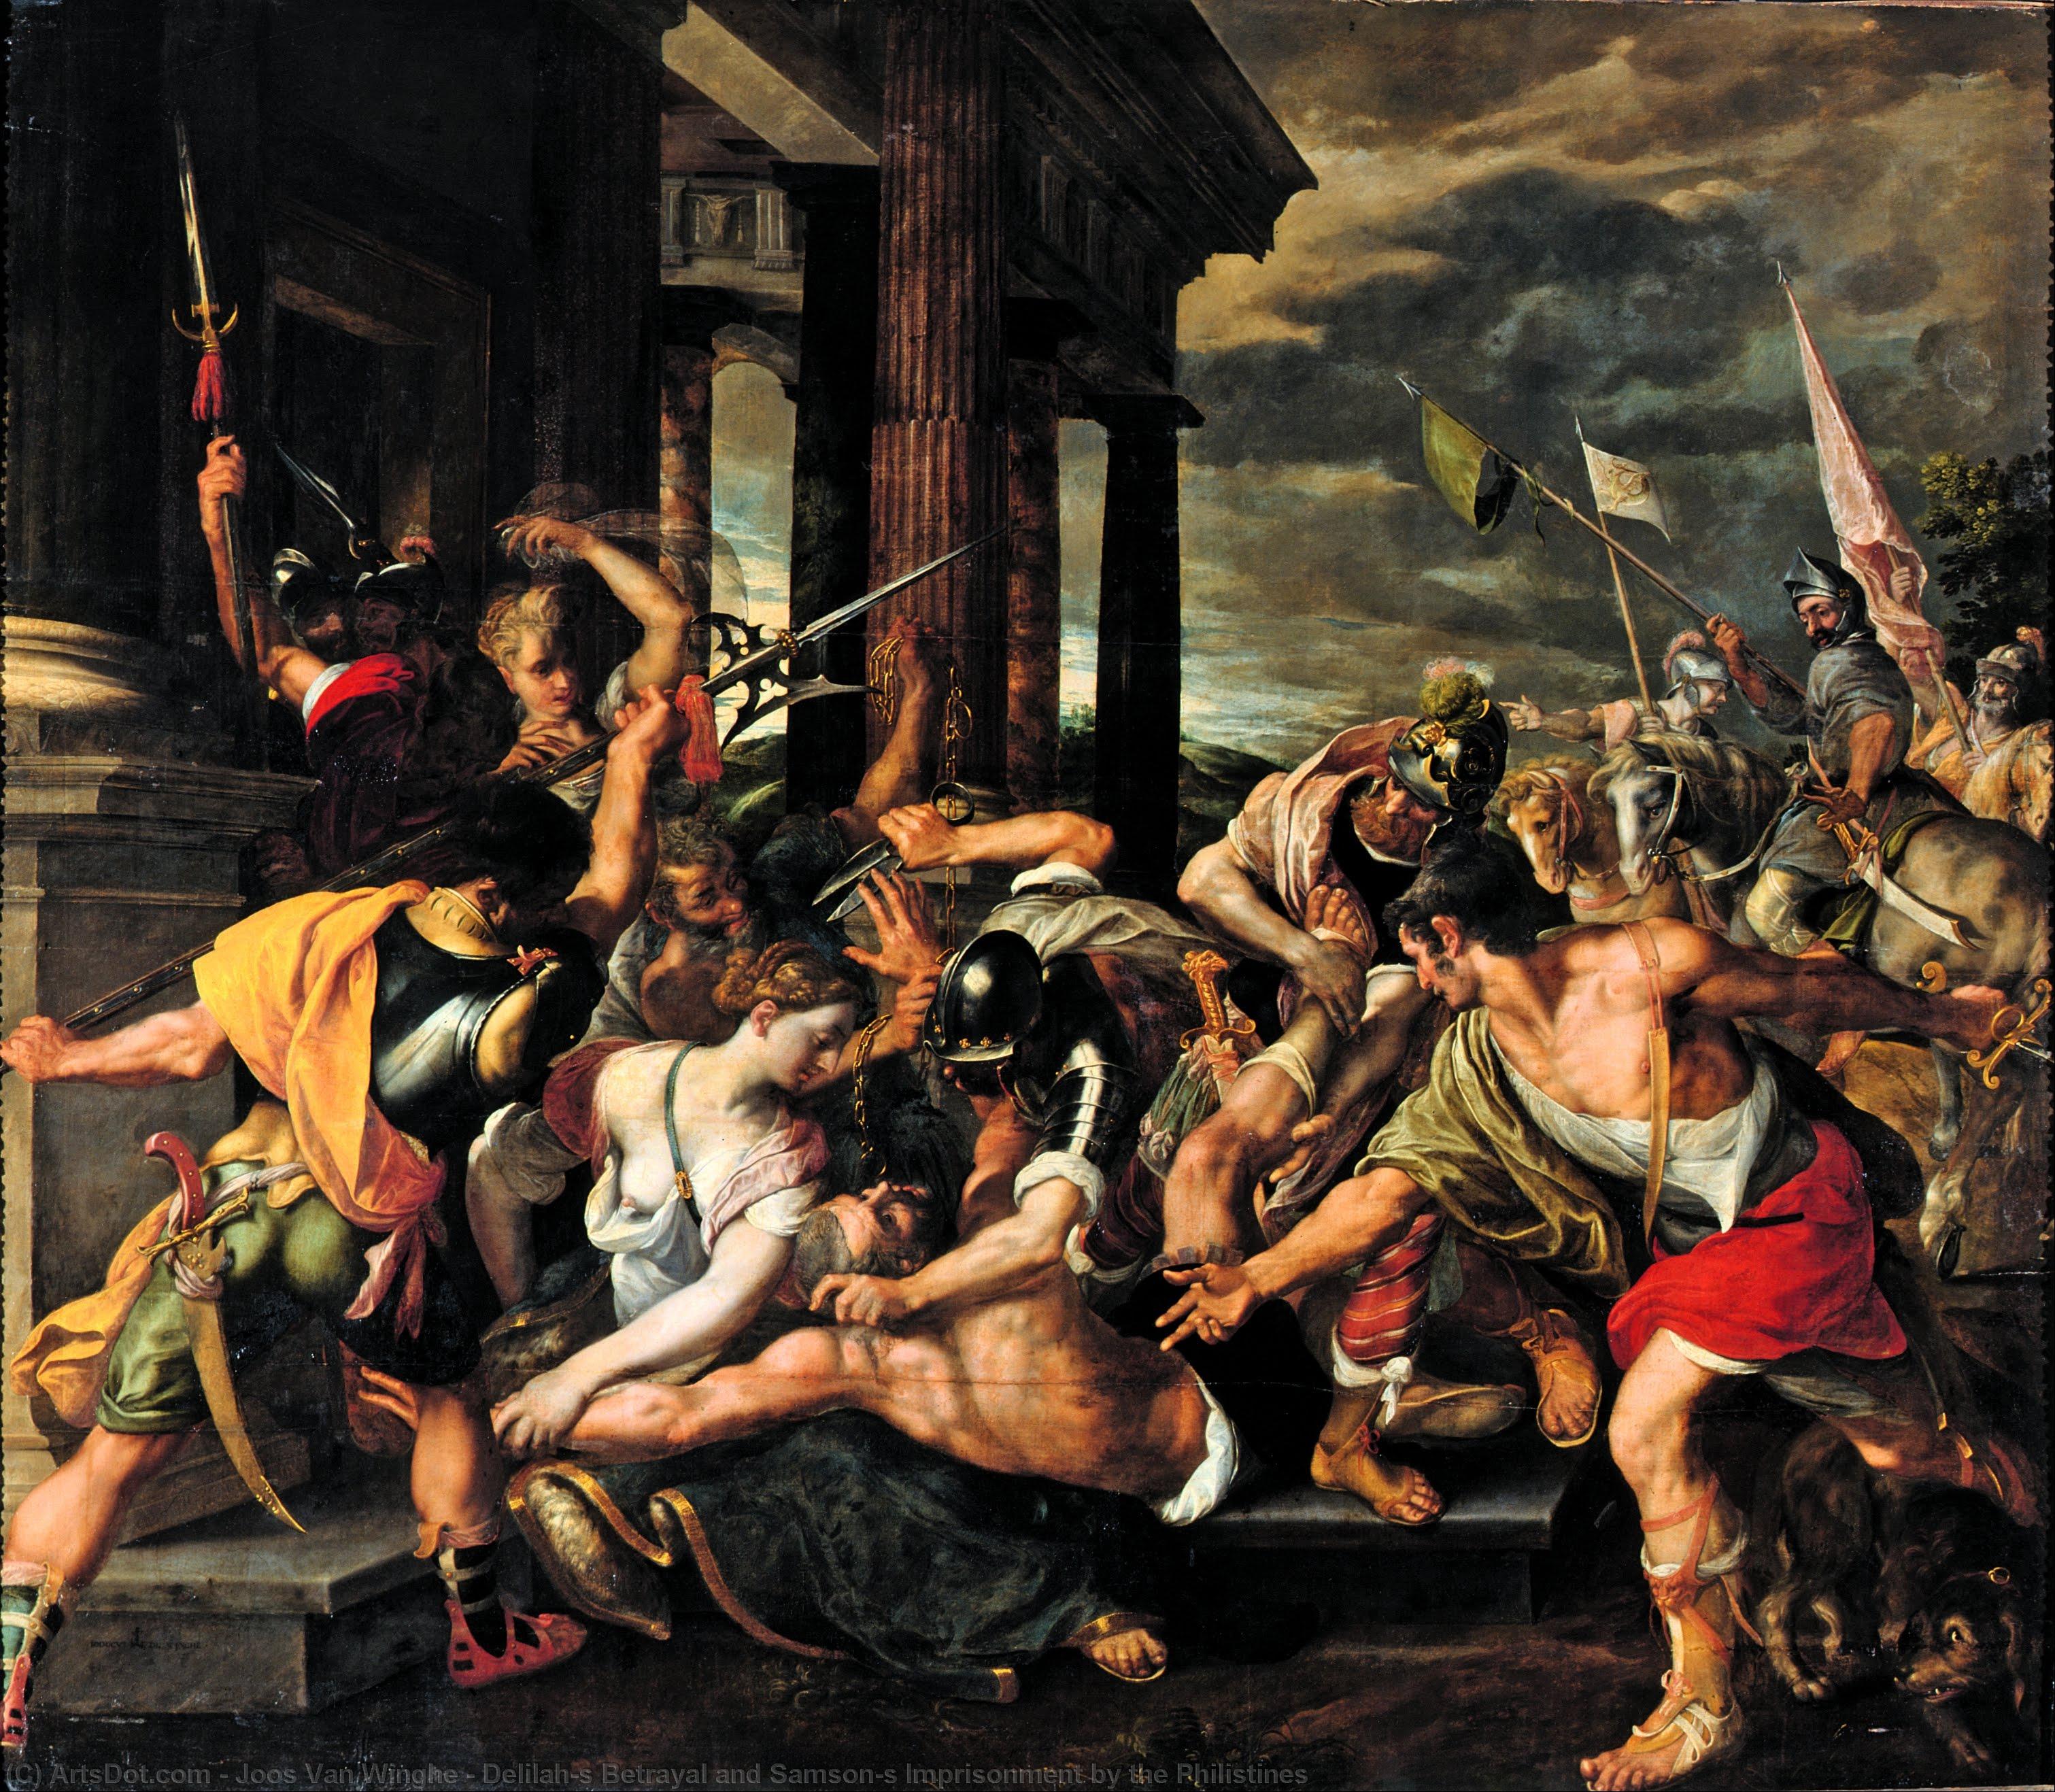 WikiOO.org - Encyclopedia of Fine Arts - Lukisan, Artwork Joos Van Winghe - Delilah’s Betrayal and Samson’s Imprisonment by the Philistines